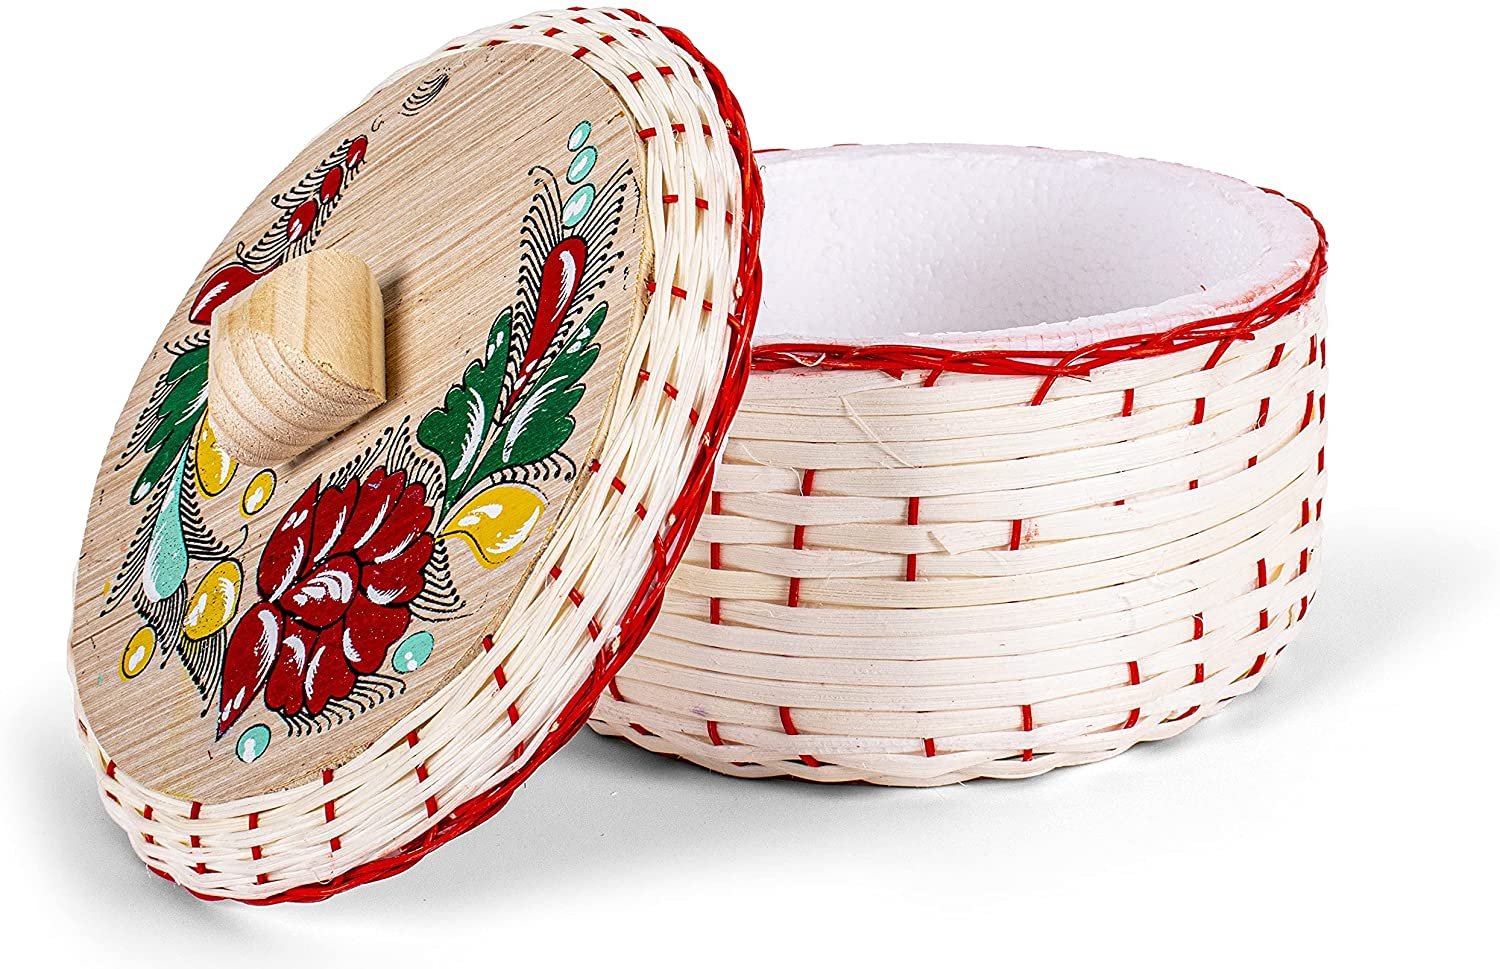 Genuine Mexican Handwoven Tortillero with added Insulation, Fiesta Mexican  Tortilla Warmer, Tortilla Holder, Tortilla Keeper,Tortilleros Mexicanos